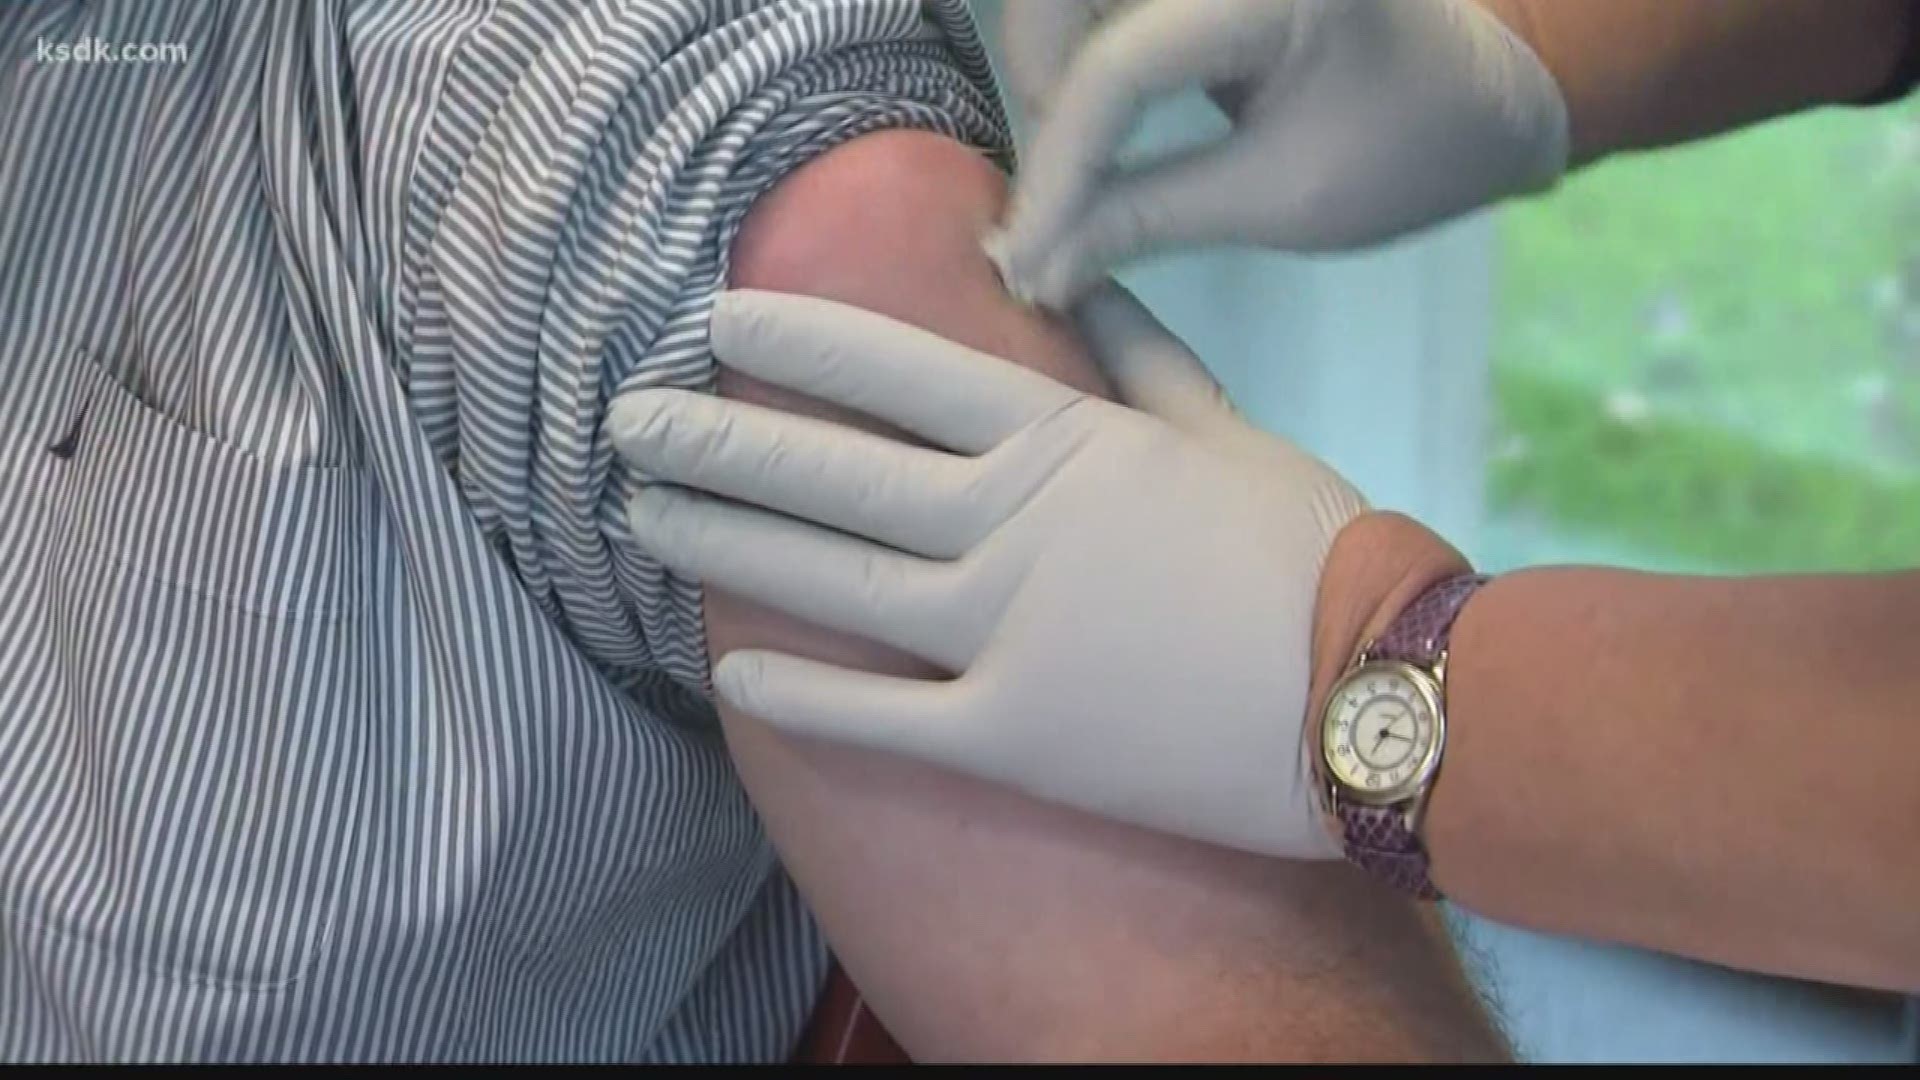 The deadline to get your child vaccinated for school is next Monday. St. Louis County is making it easy for families with a free clinic Tuesday.